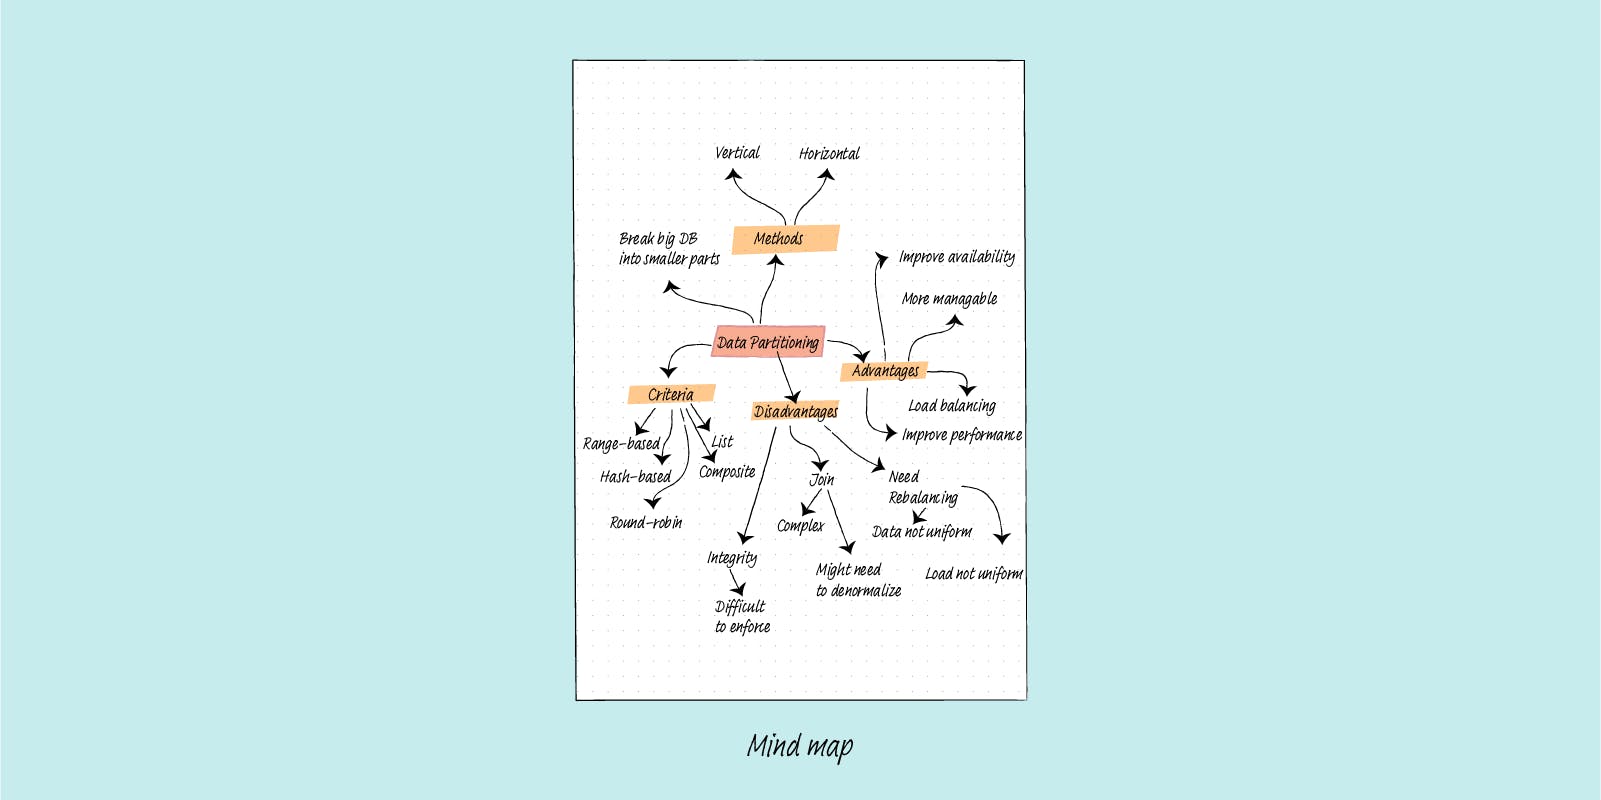 Mind map -- Image by author